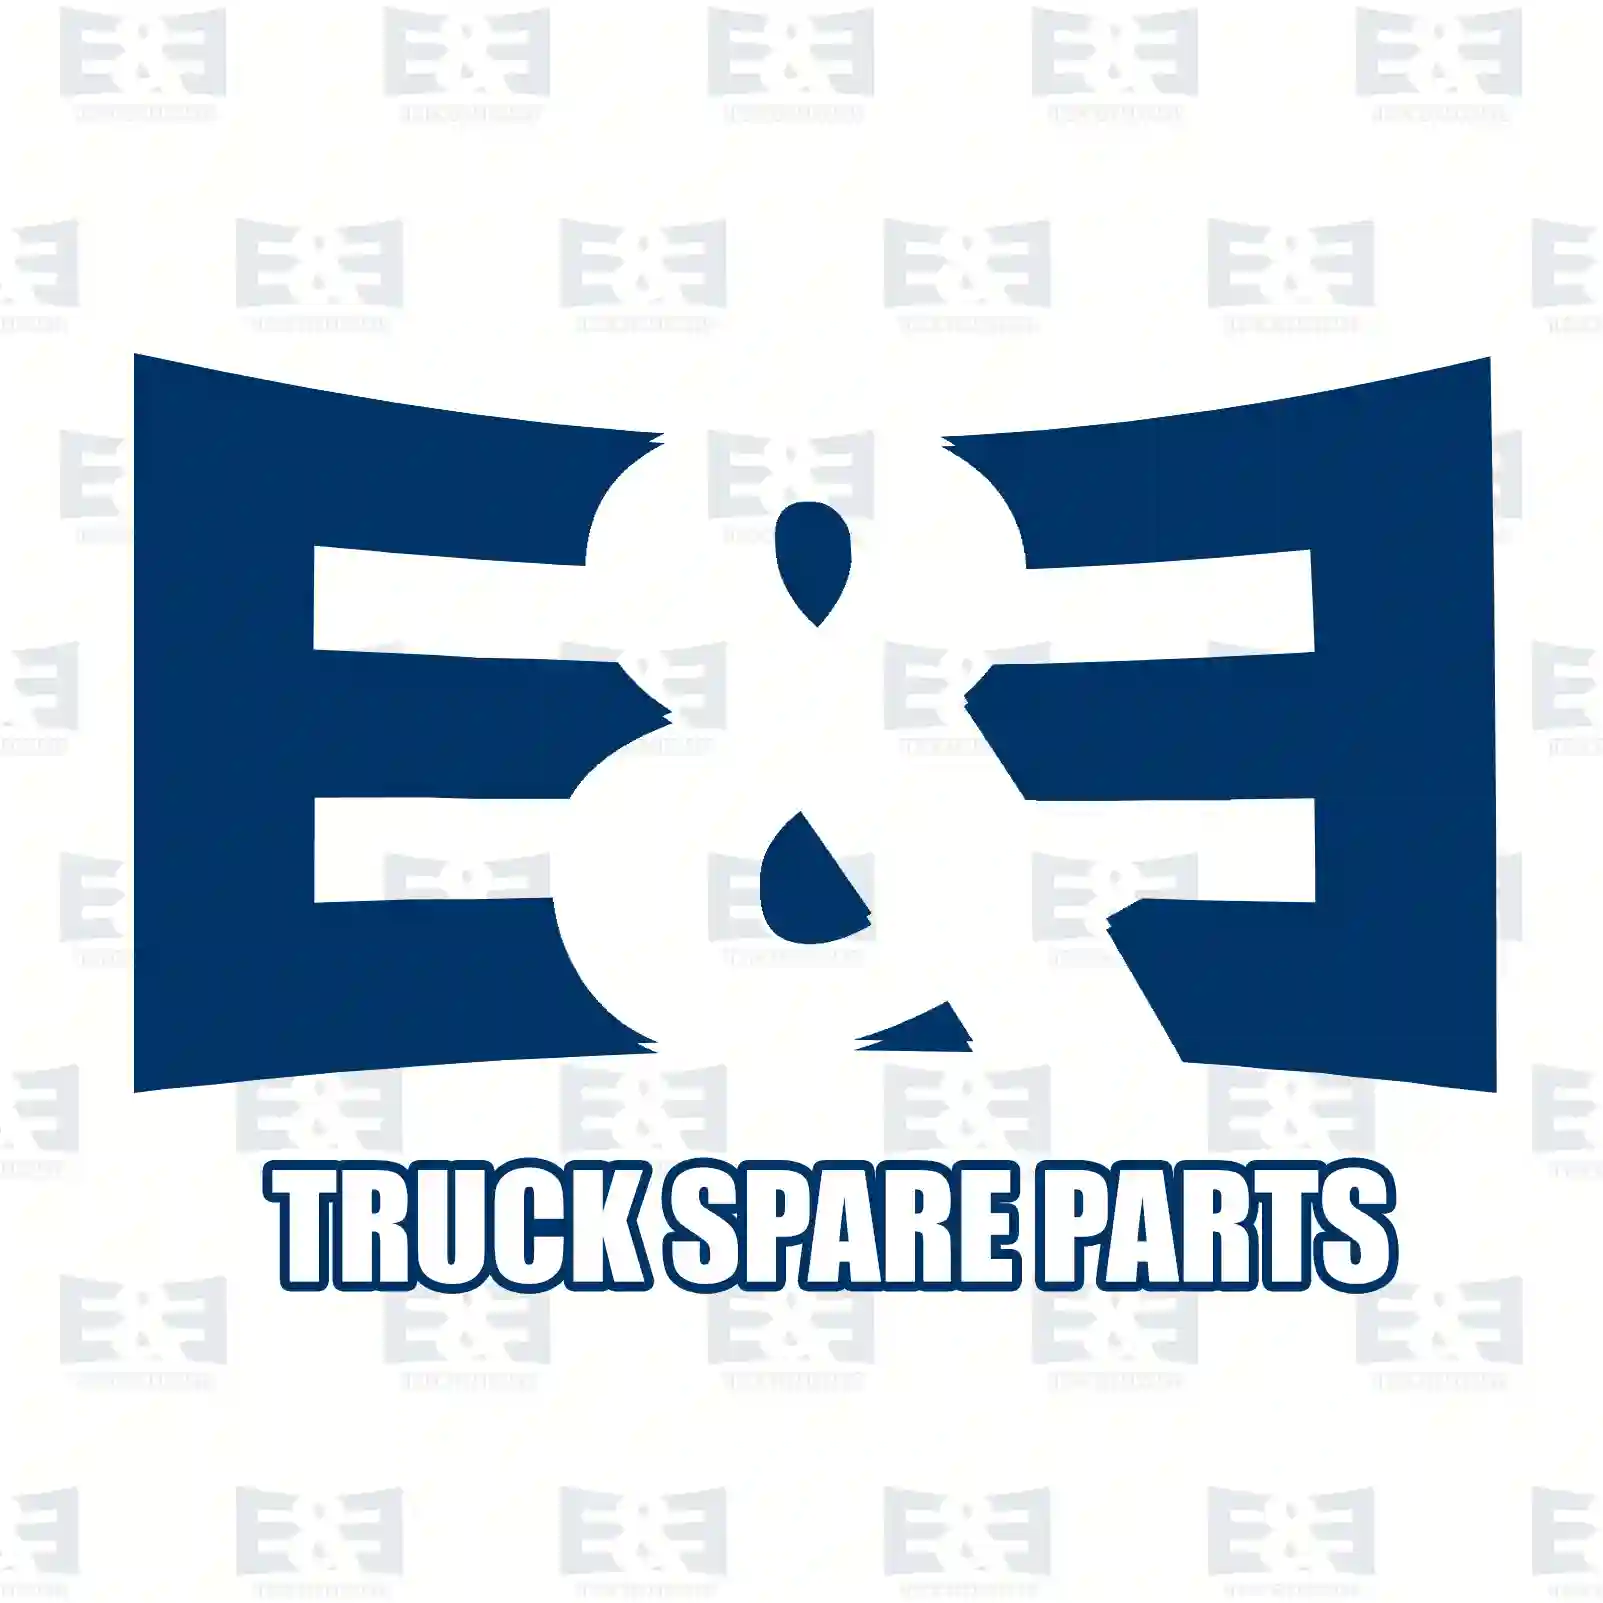  Gear, power-take-off || E&E Truck Spare Parts | Truck Spare Parts, Auotomotive Spare Parts